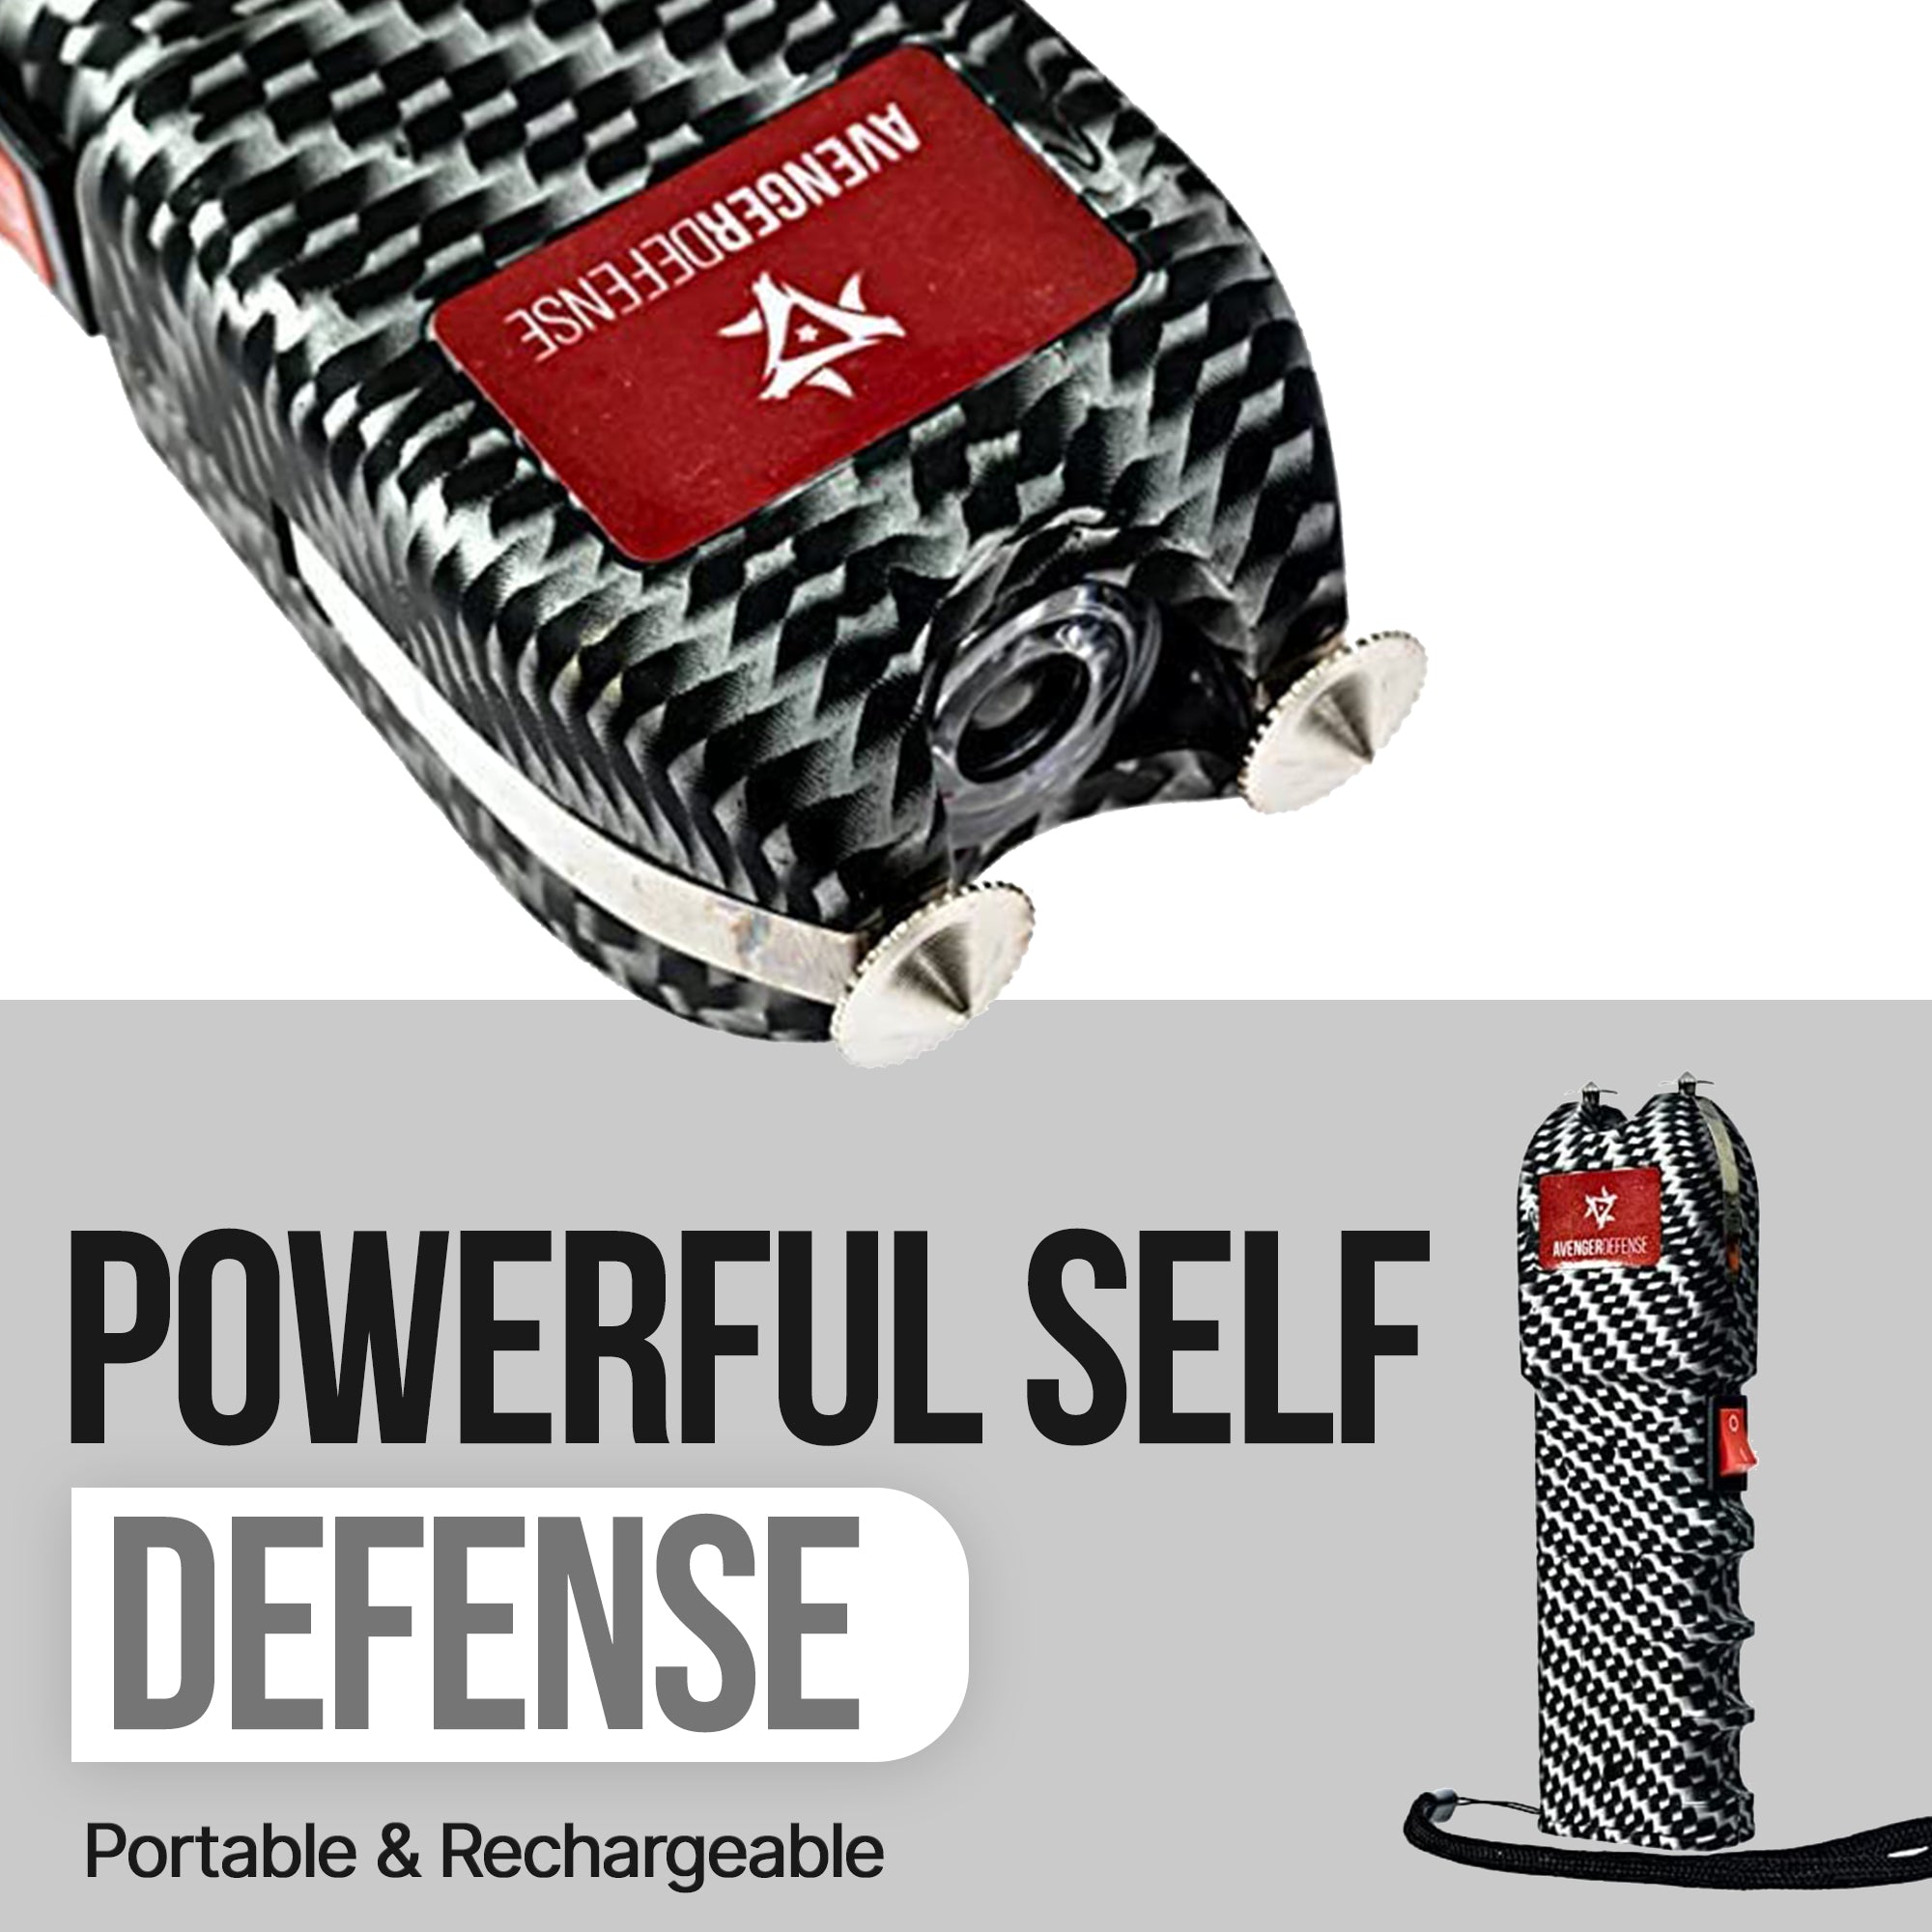 Portable Stun Gun – ADS-10 Extremely Powerful Rechargeable Stun Gun for Self Defense and Protection